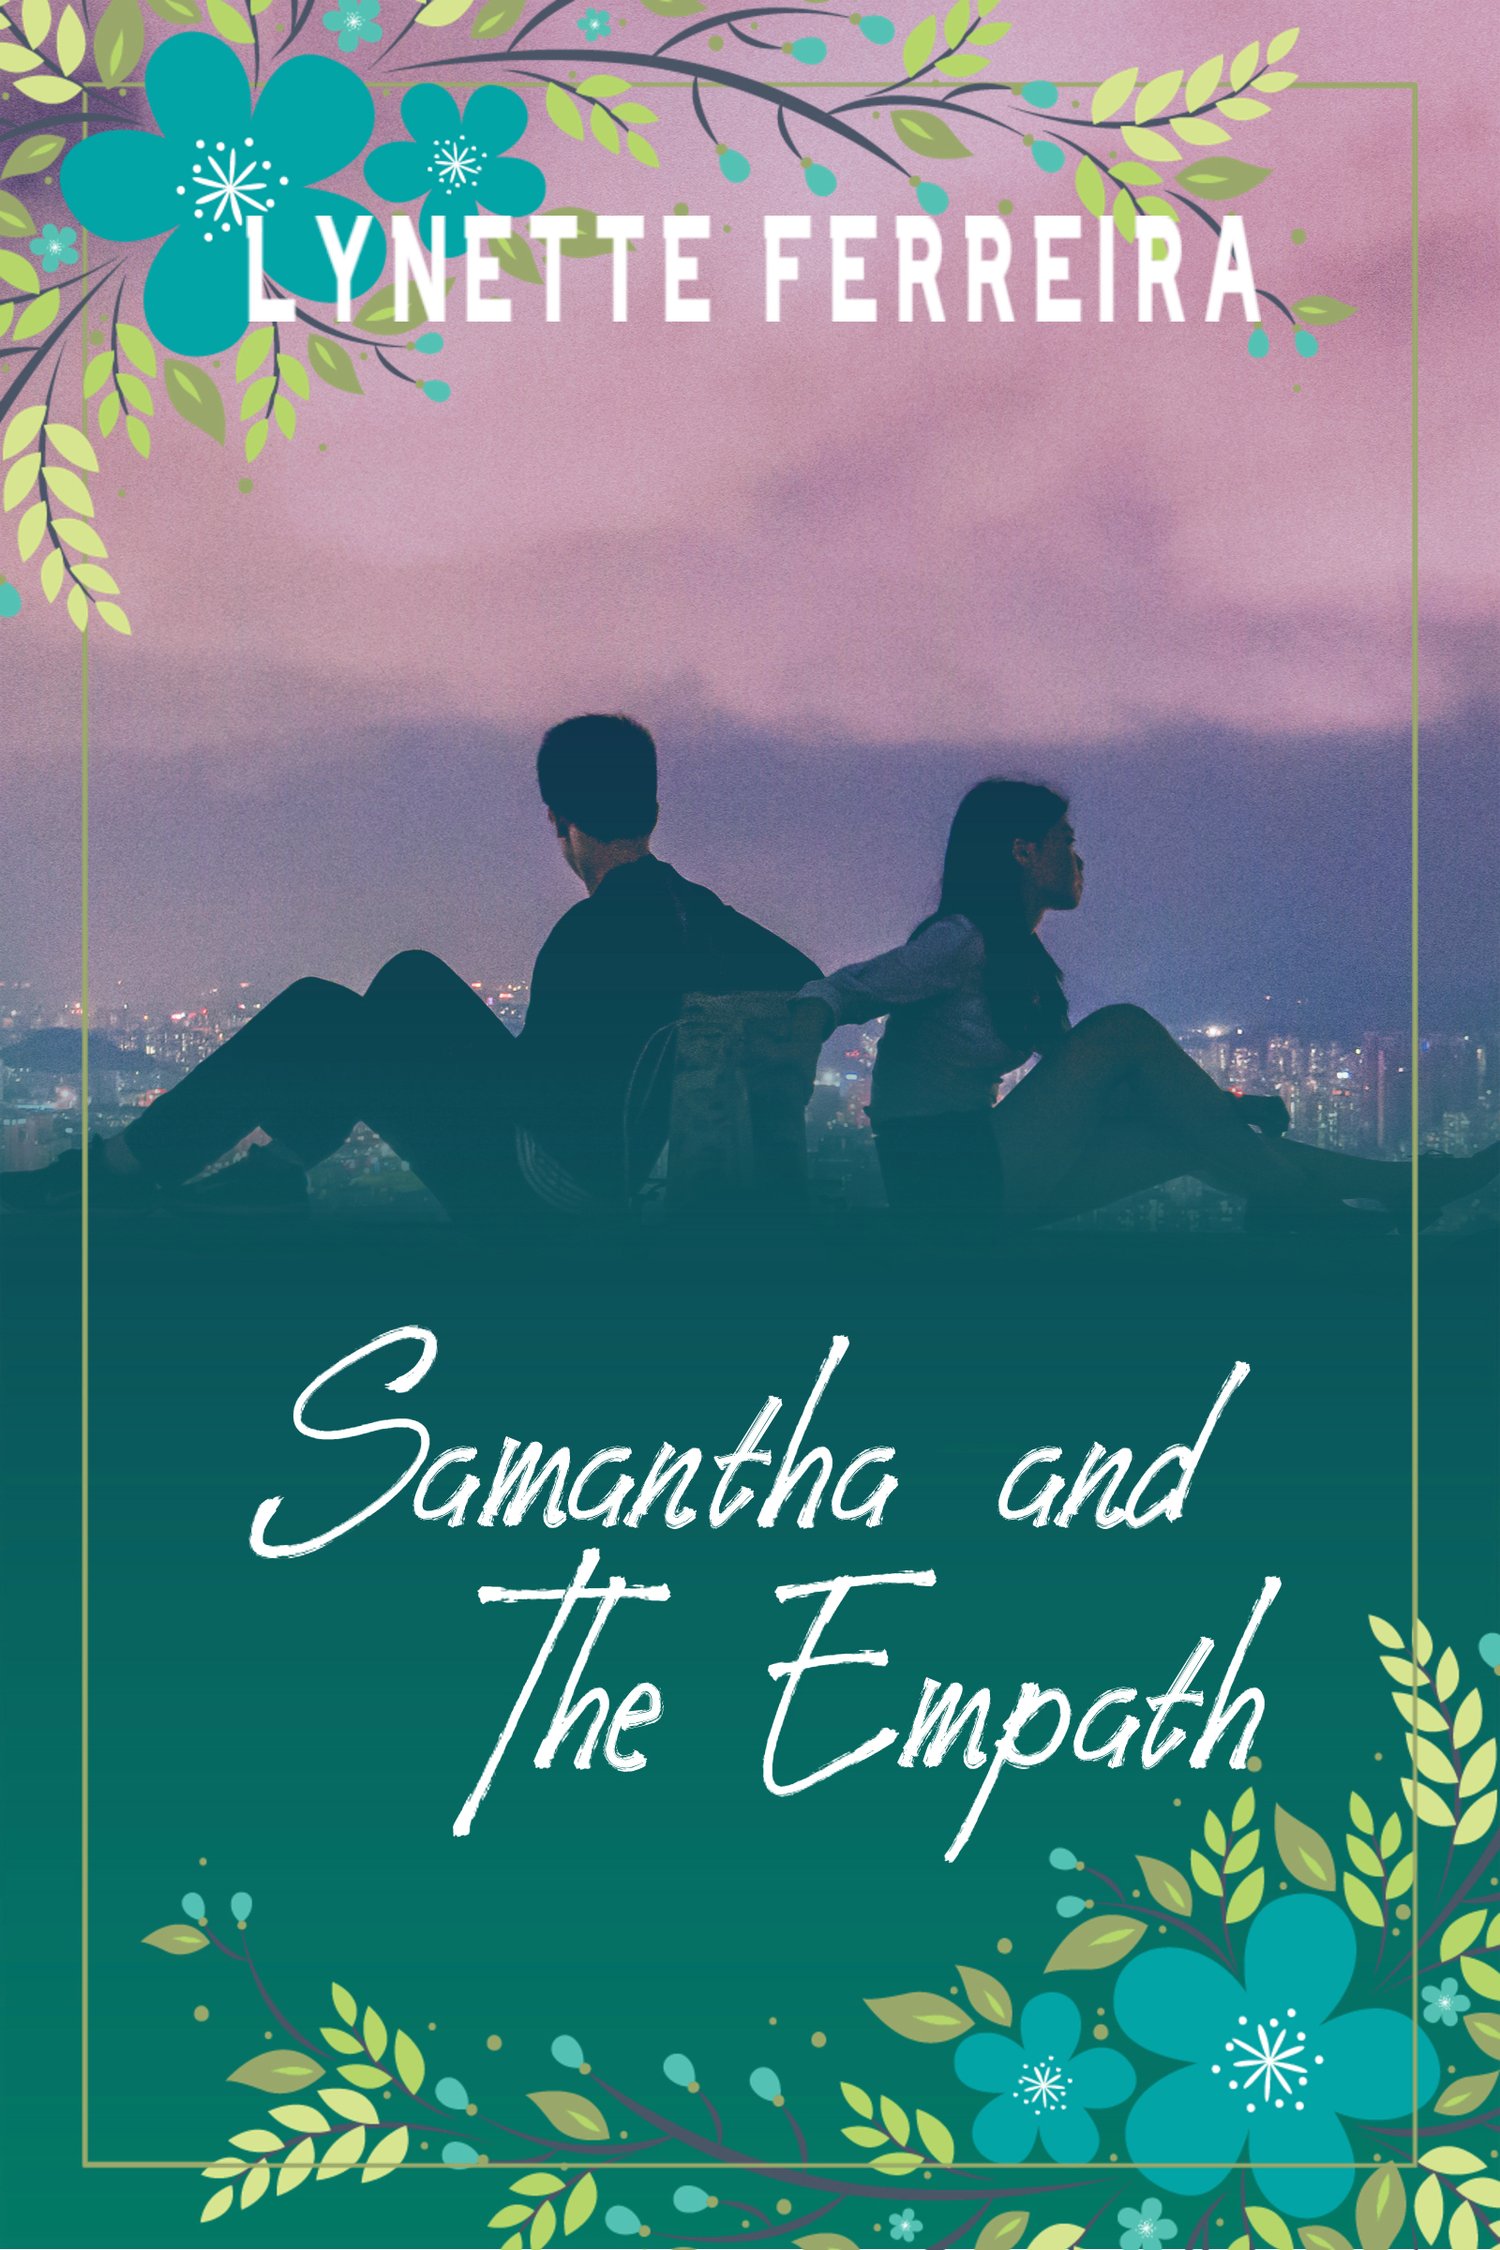 Samantha and The Empath by Lynette Ferreira